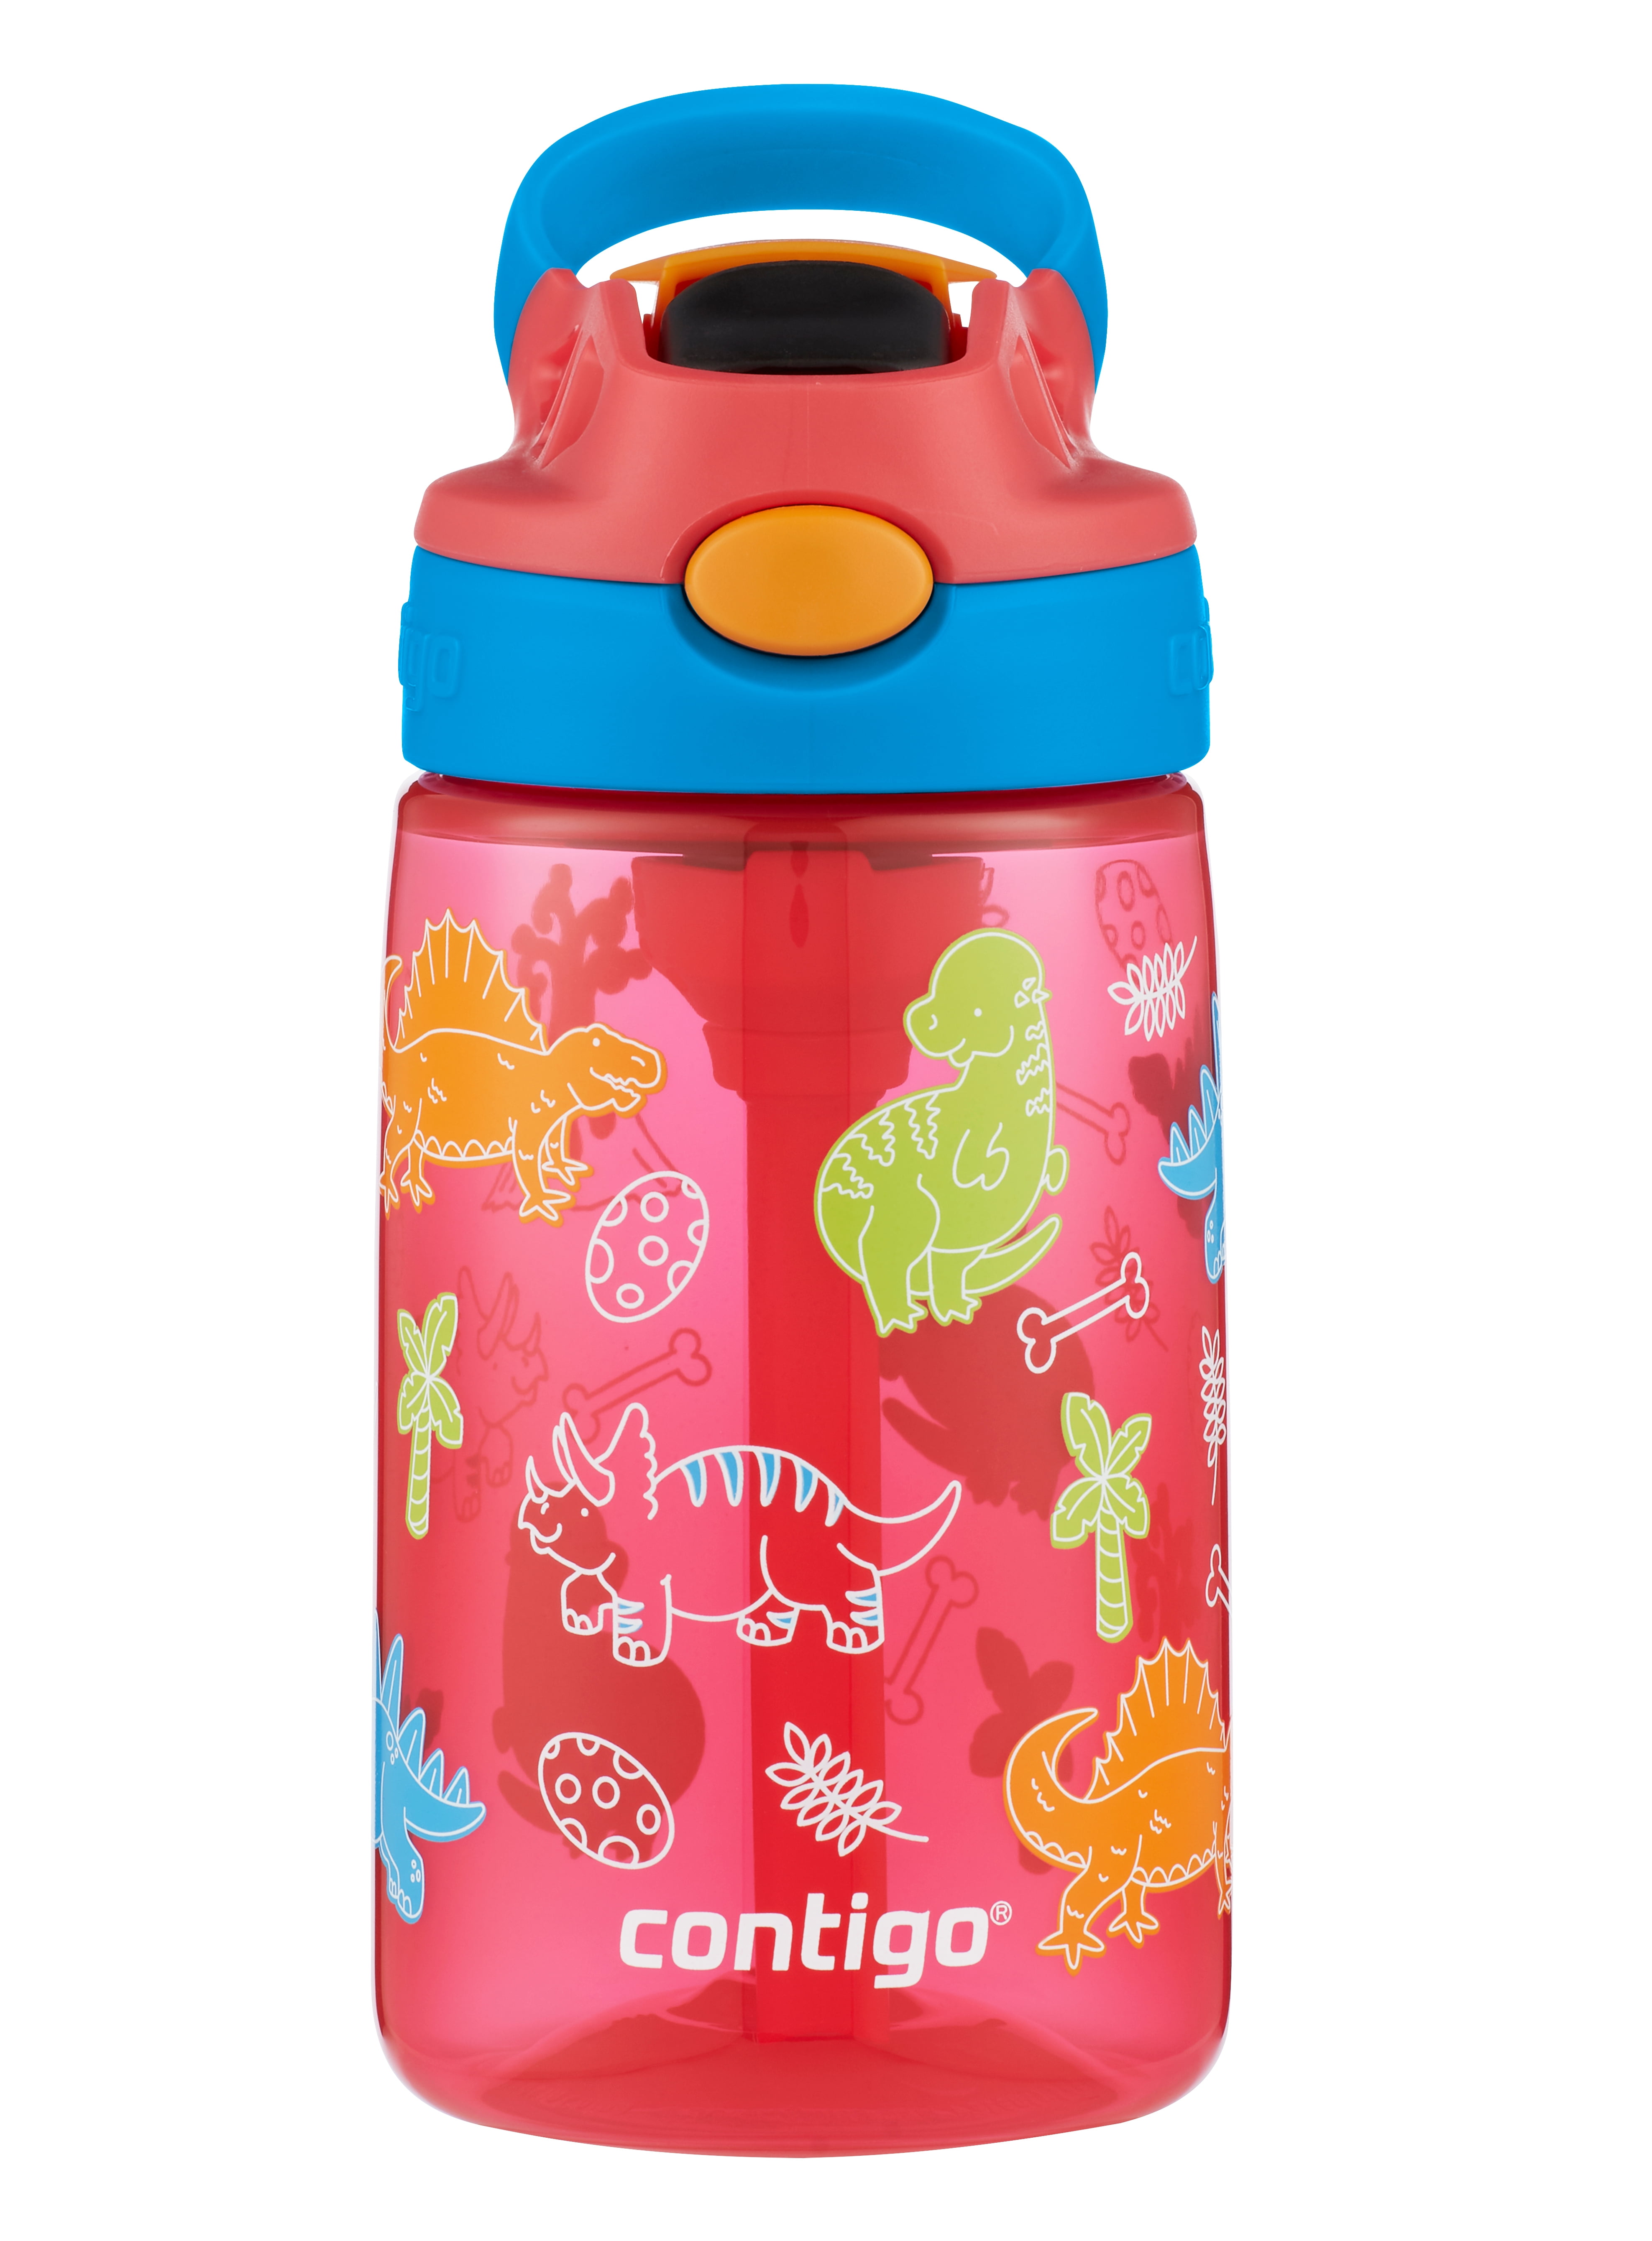 Baby Products Online - Contigo Kids water bottle, 14 ounces with automatic  nozzle technology - spill-resistant, easy-to-clean lid design - for ages 3  plus, dishwasher safe top rack - Kideno